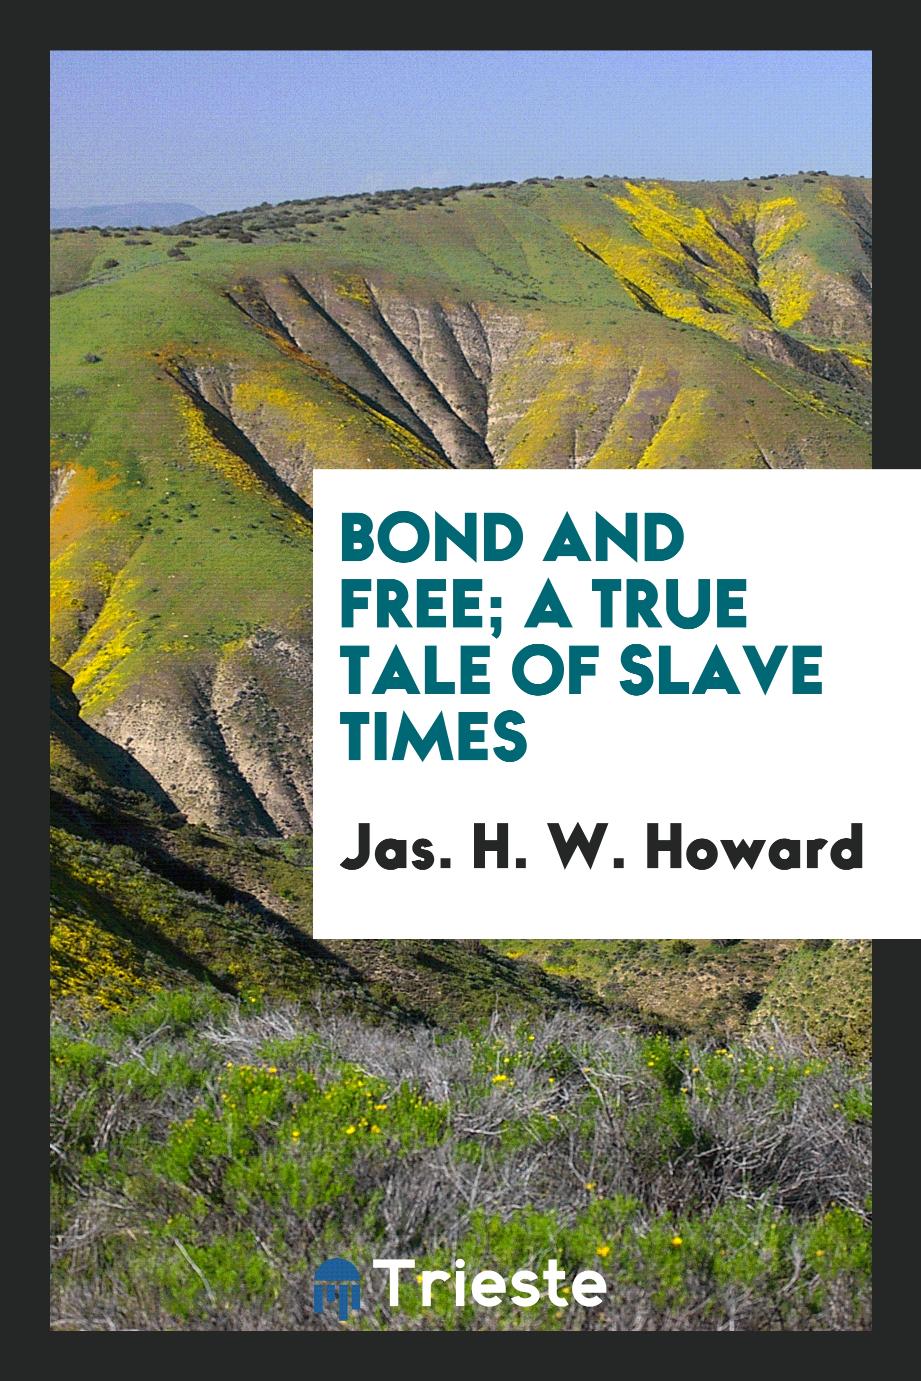 Bond and free; a true tale of slave times